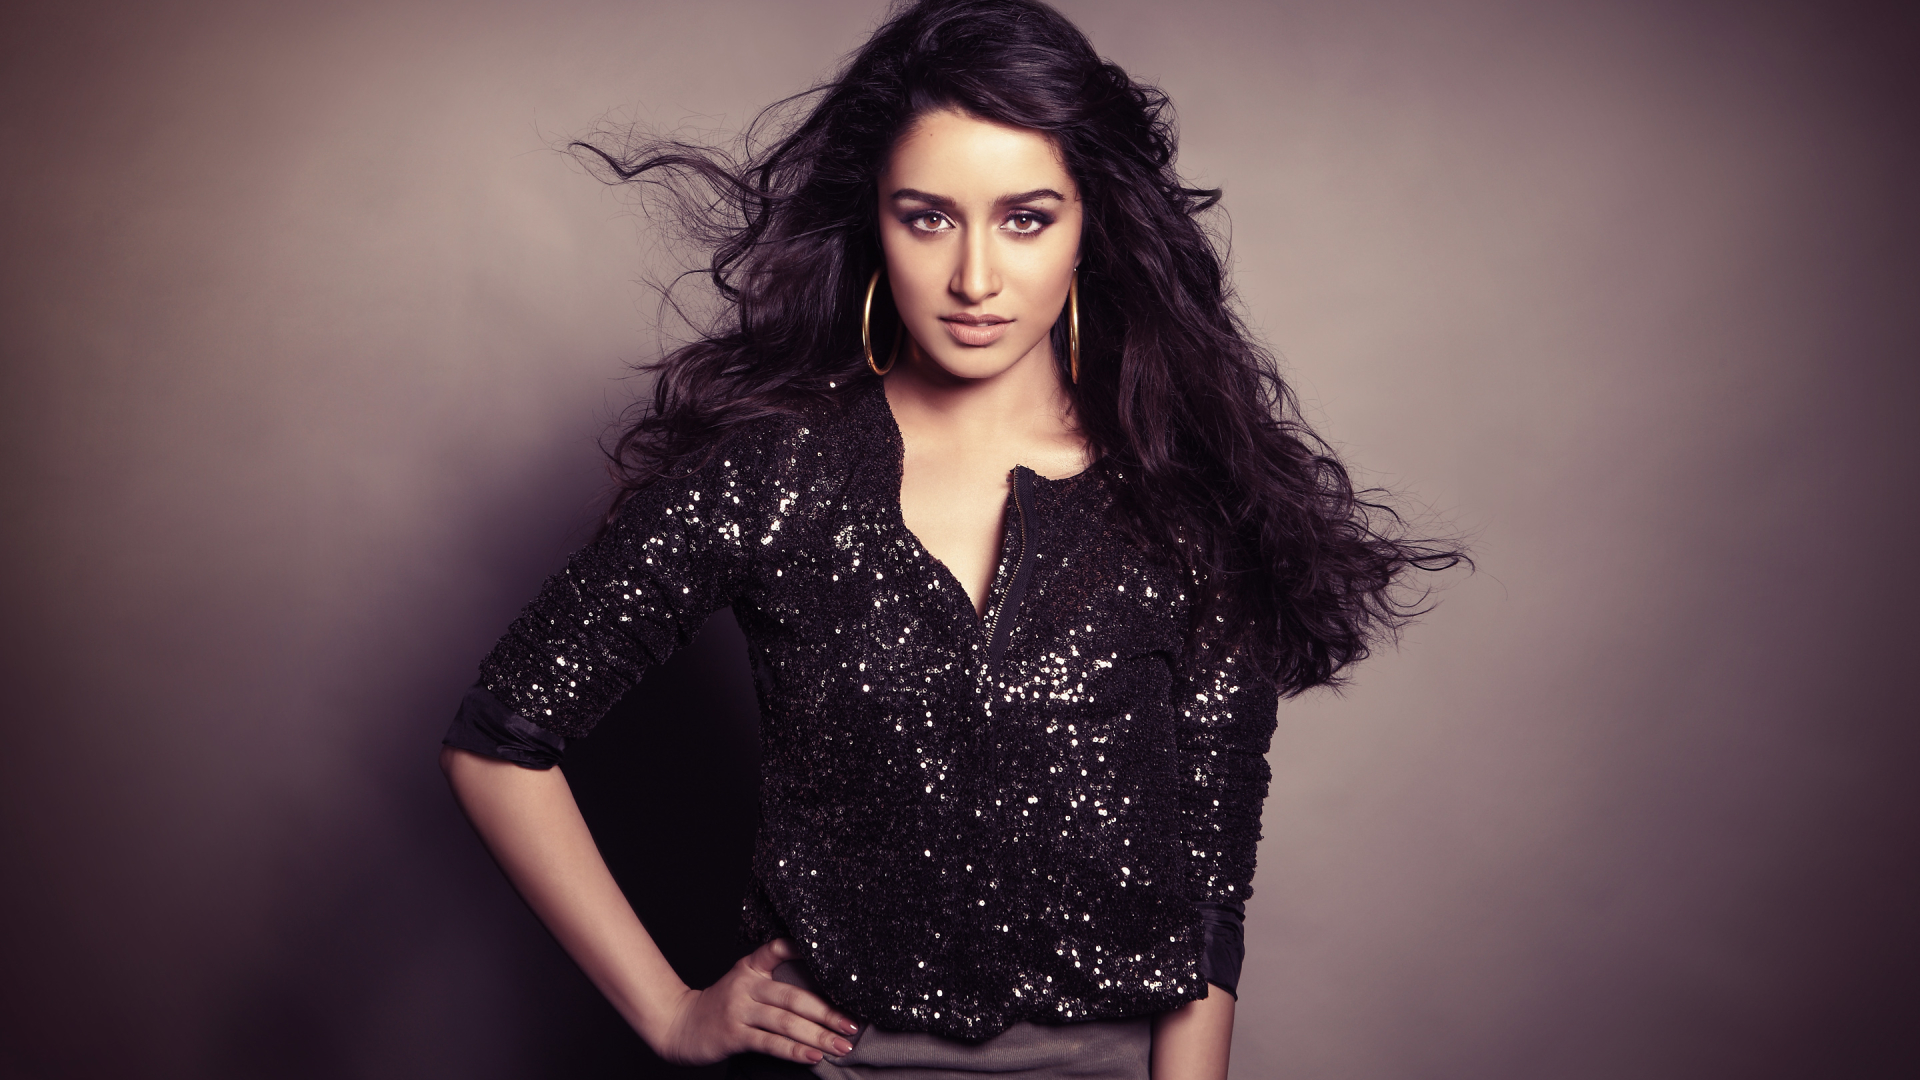 1920x1080 Shraddha Kapoor Hd Latest Wallpaper 1080P Laptop Full HD Wallpaper,  HD Indian Celebrities 4K Wallpapers, Images, Photos and Background -  Wallpapers Den